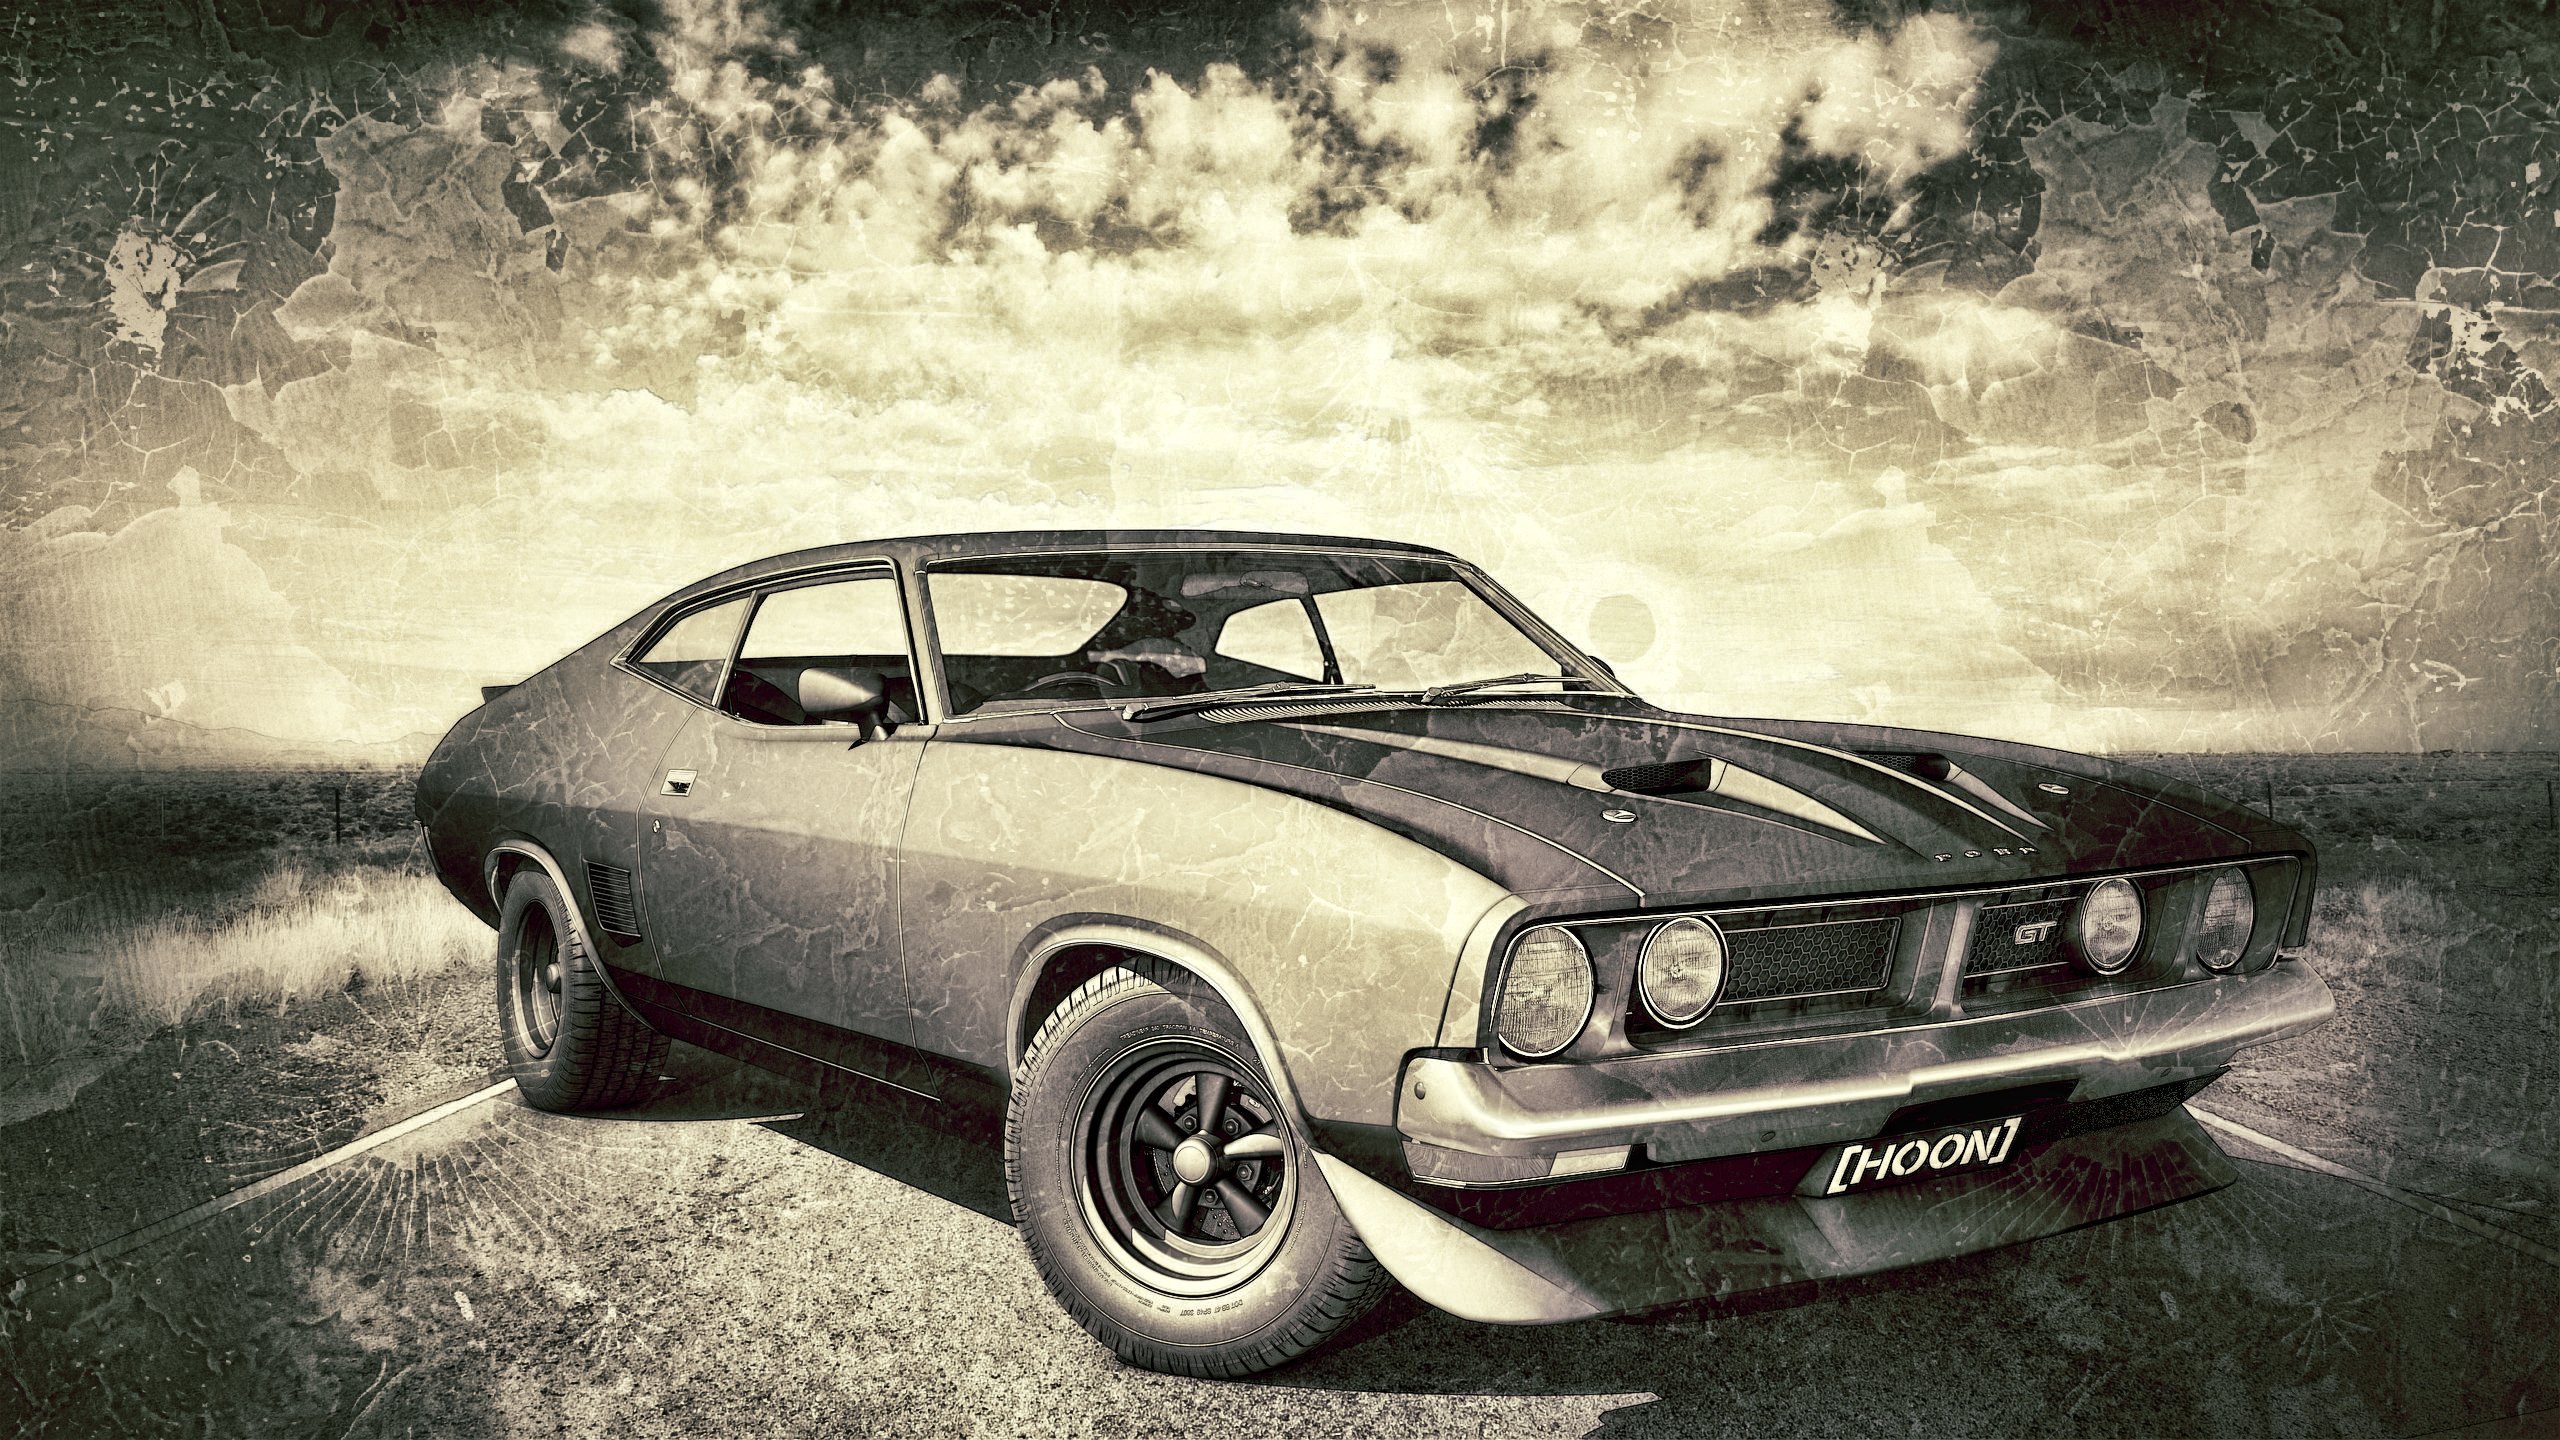 Ford Falcon Xb HD Wallpaper Background Image